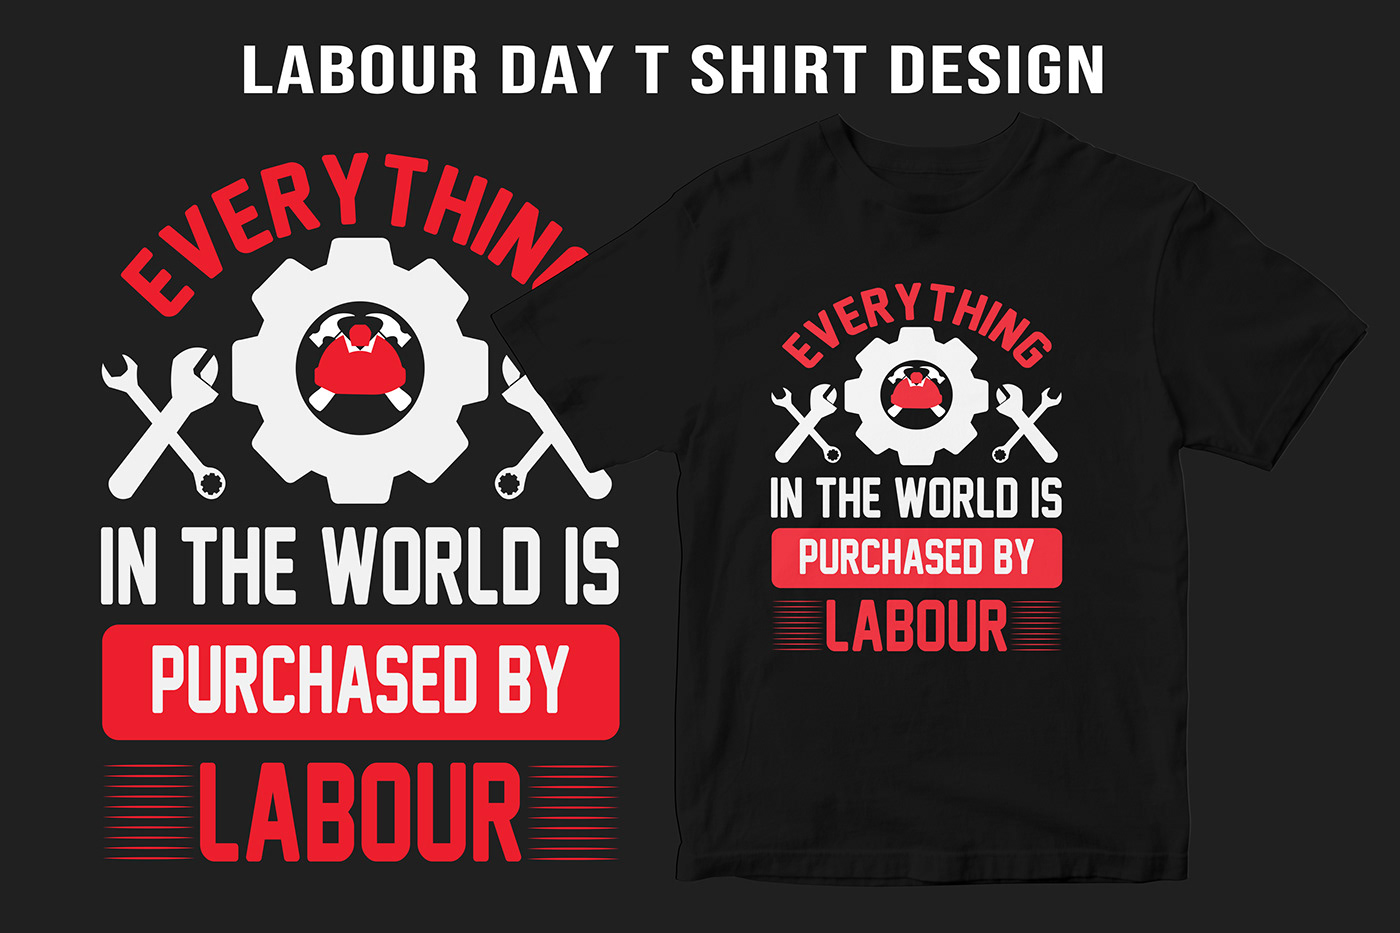 Everything Everything in the world Labour purchased PURCHASED BY PURCHASED BY LABOUR THE WORLD IS PURCHASED world world is purchased